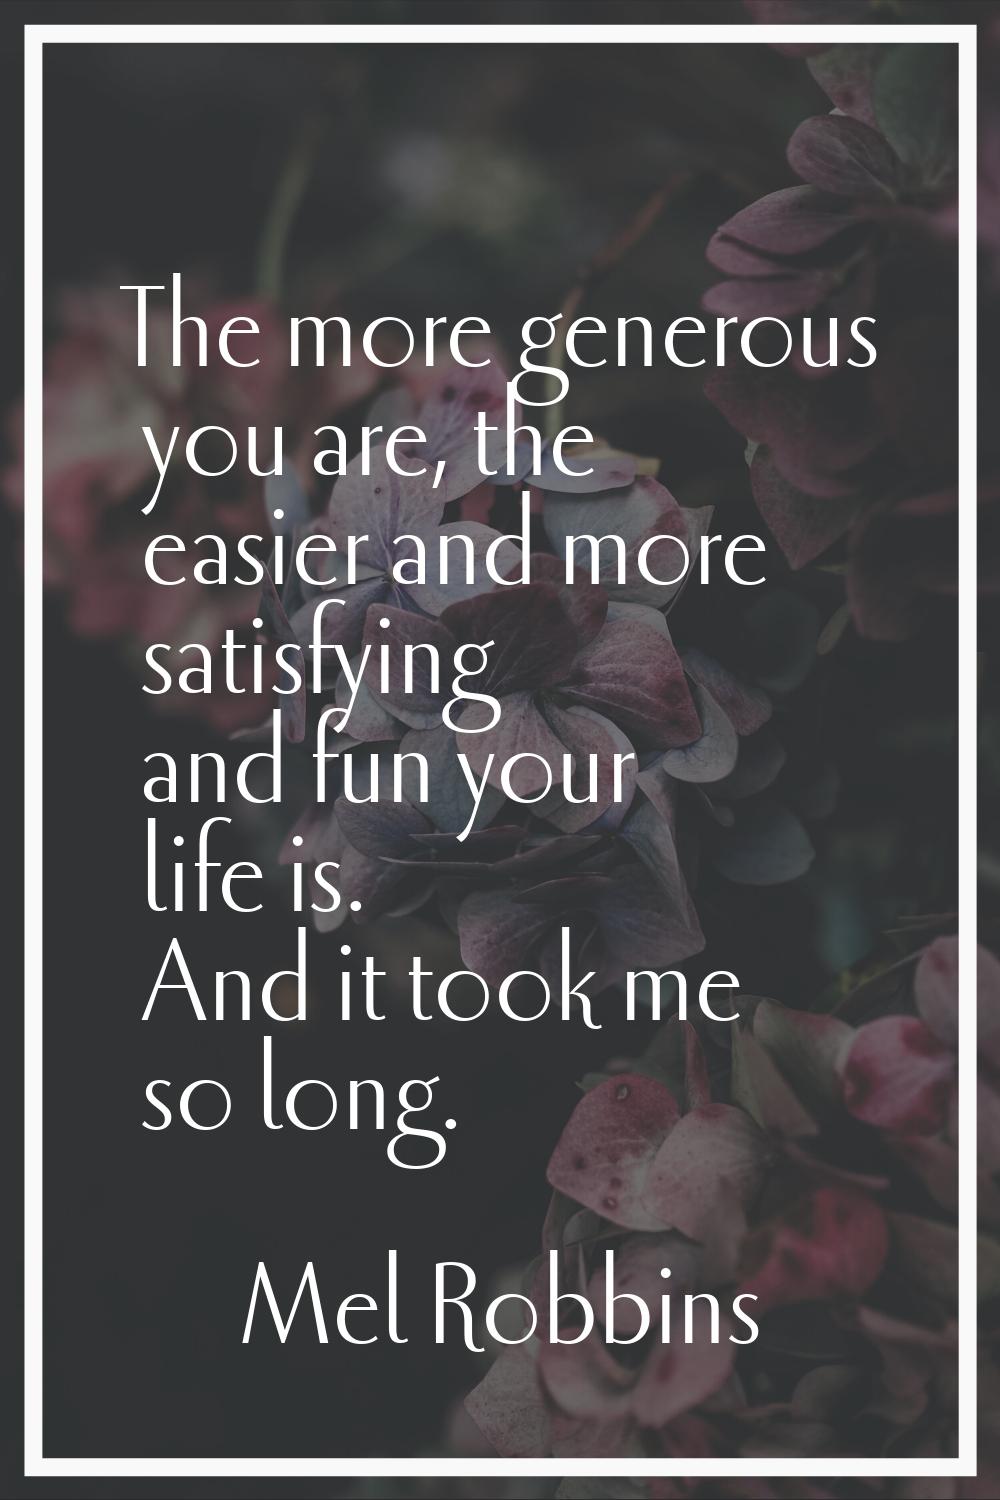 The more generous you are, the easier and more satisfying and fun your life is. And it took me so l